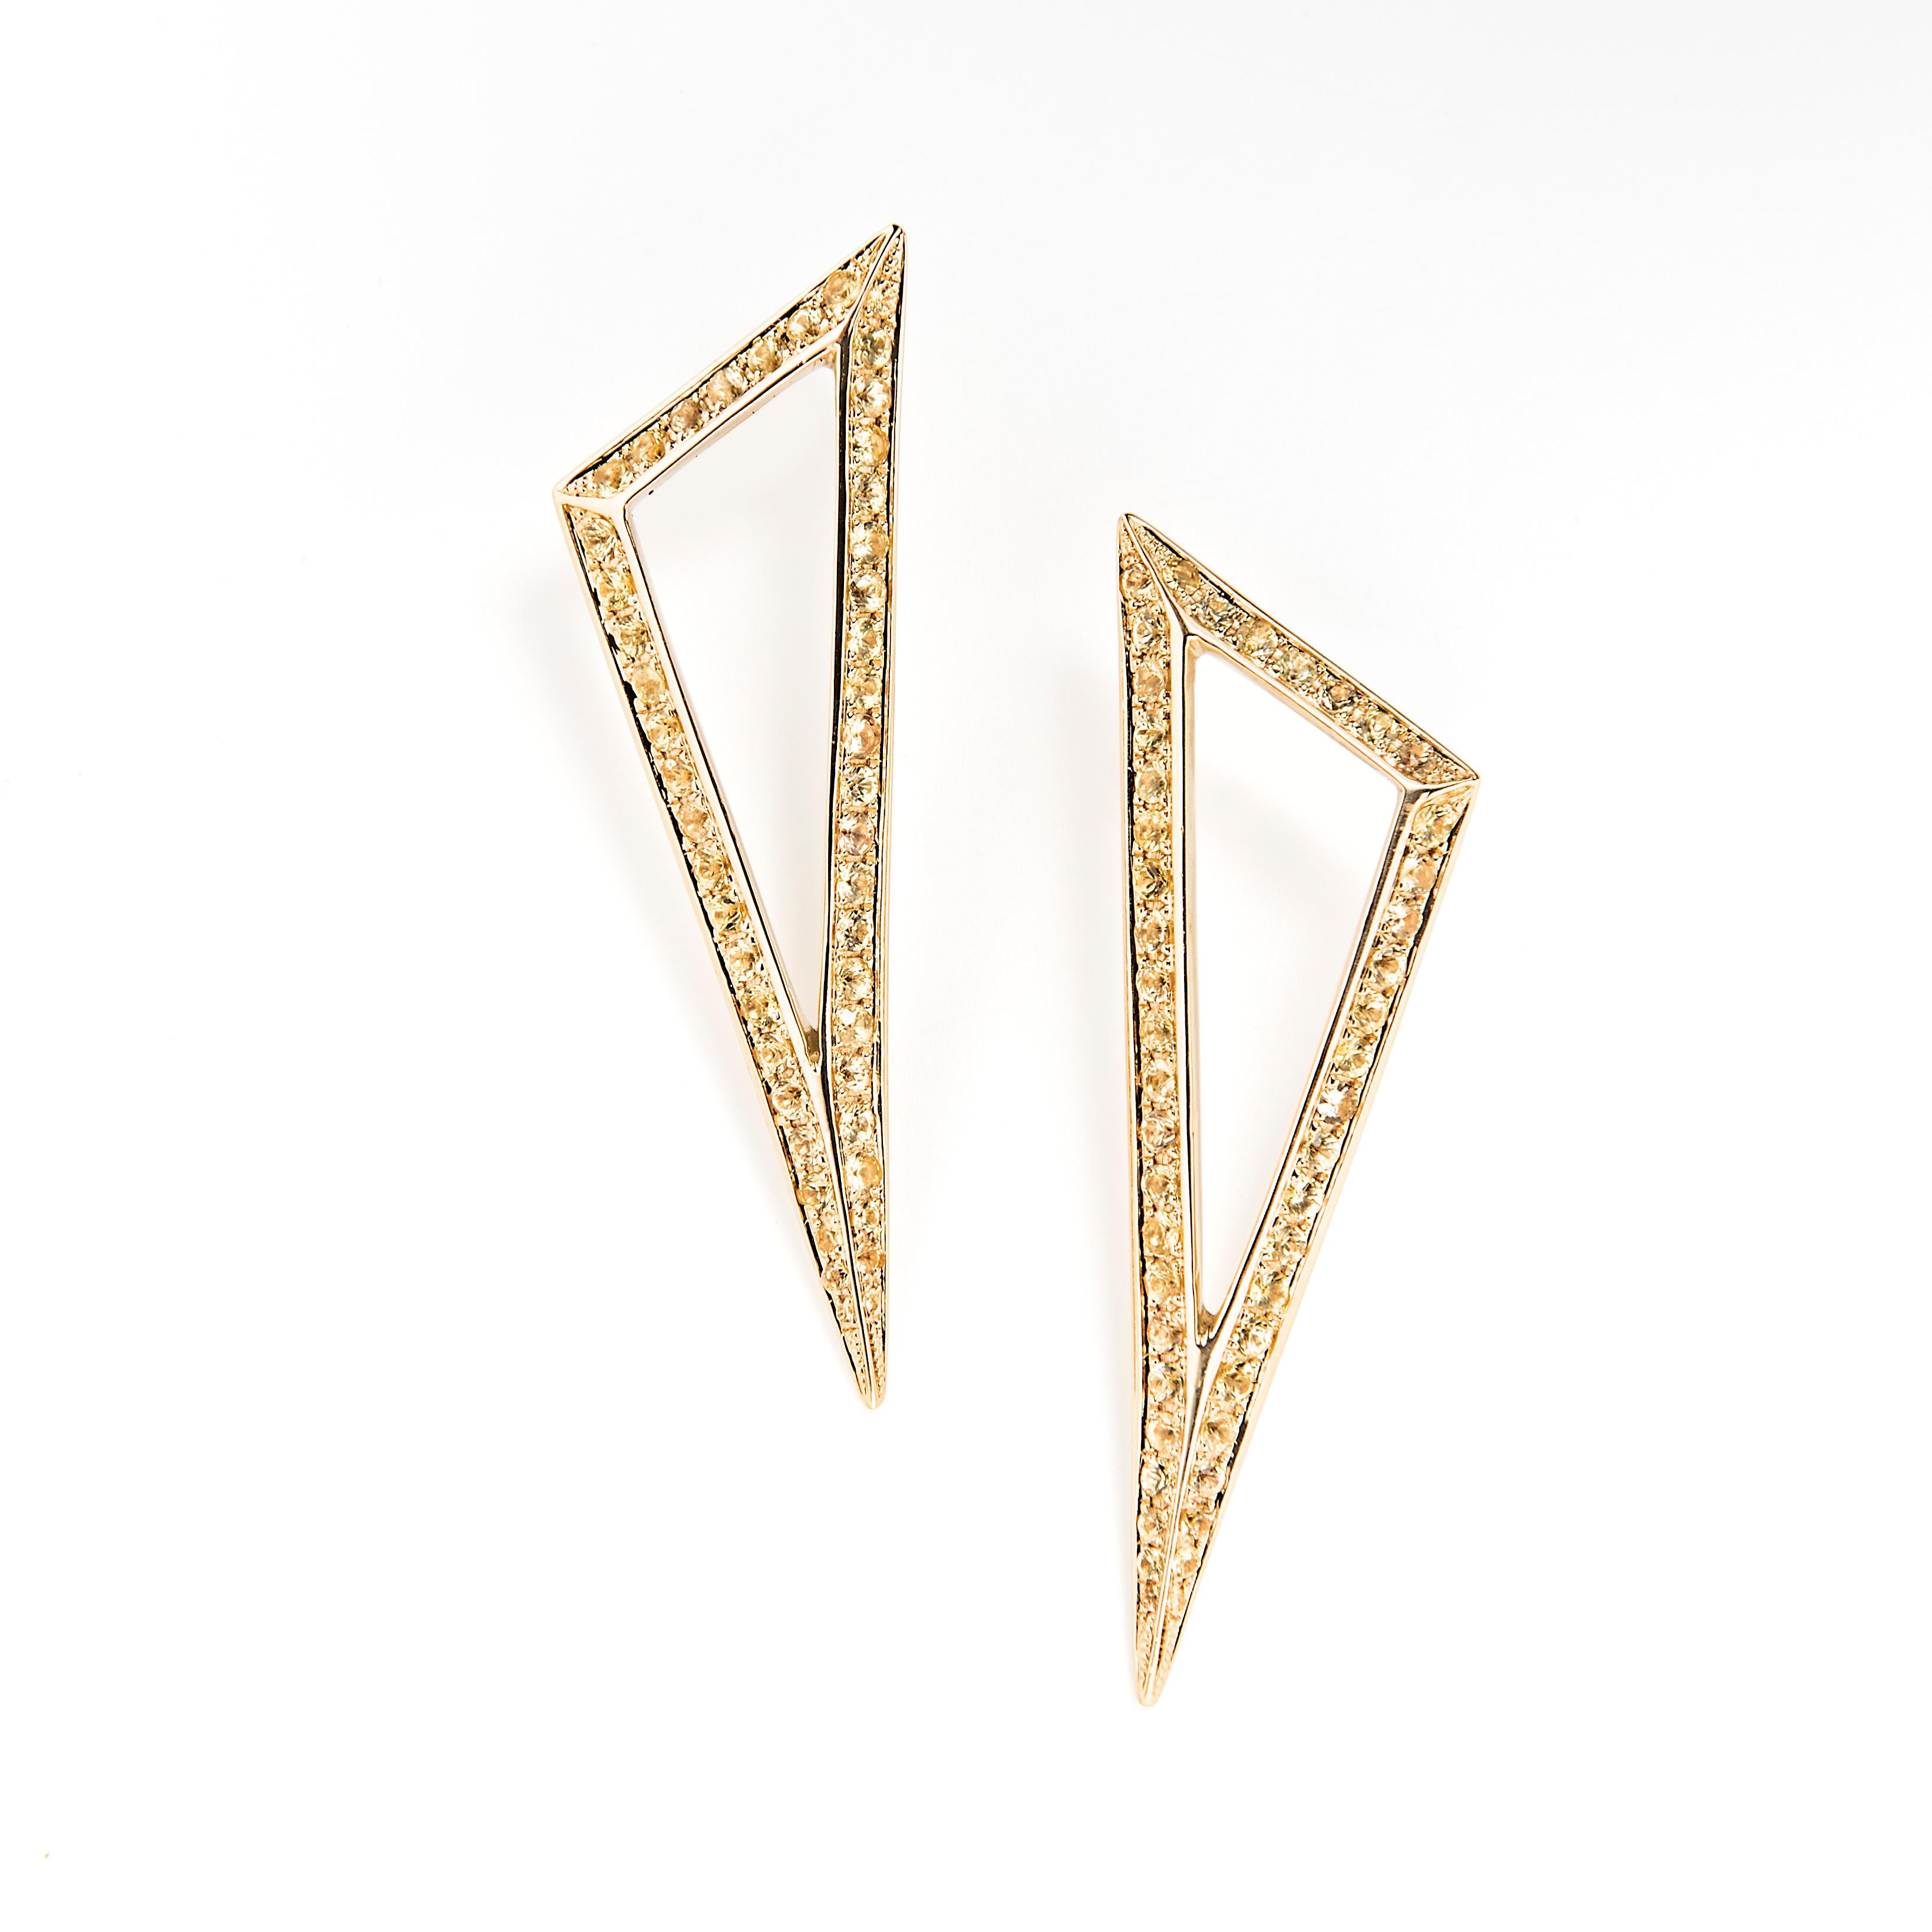 Keep your look on point with these triangle form earrings. The refined shape sparkles with dazzling yellow sapphires.

18k White Gold
Yellow sapphire TCW 2.60
Friction post and back closure 
Length is 2 inches and width is 0.65 inches